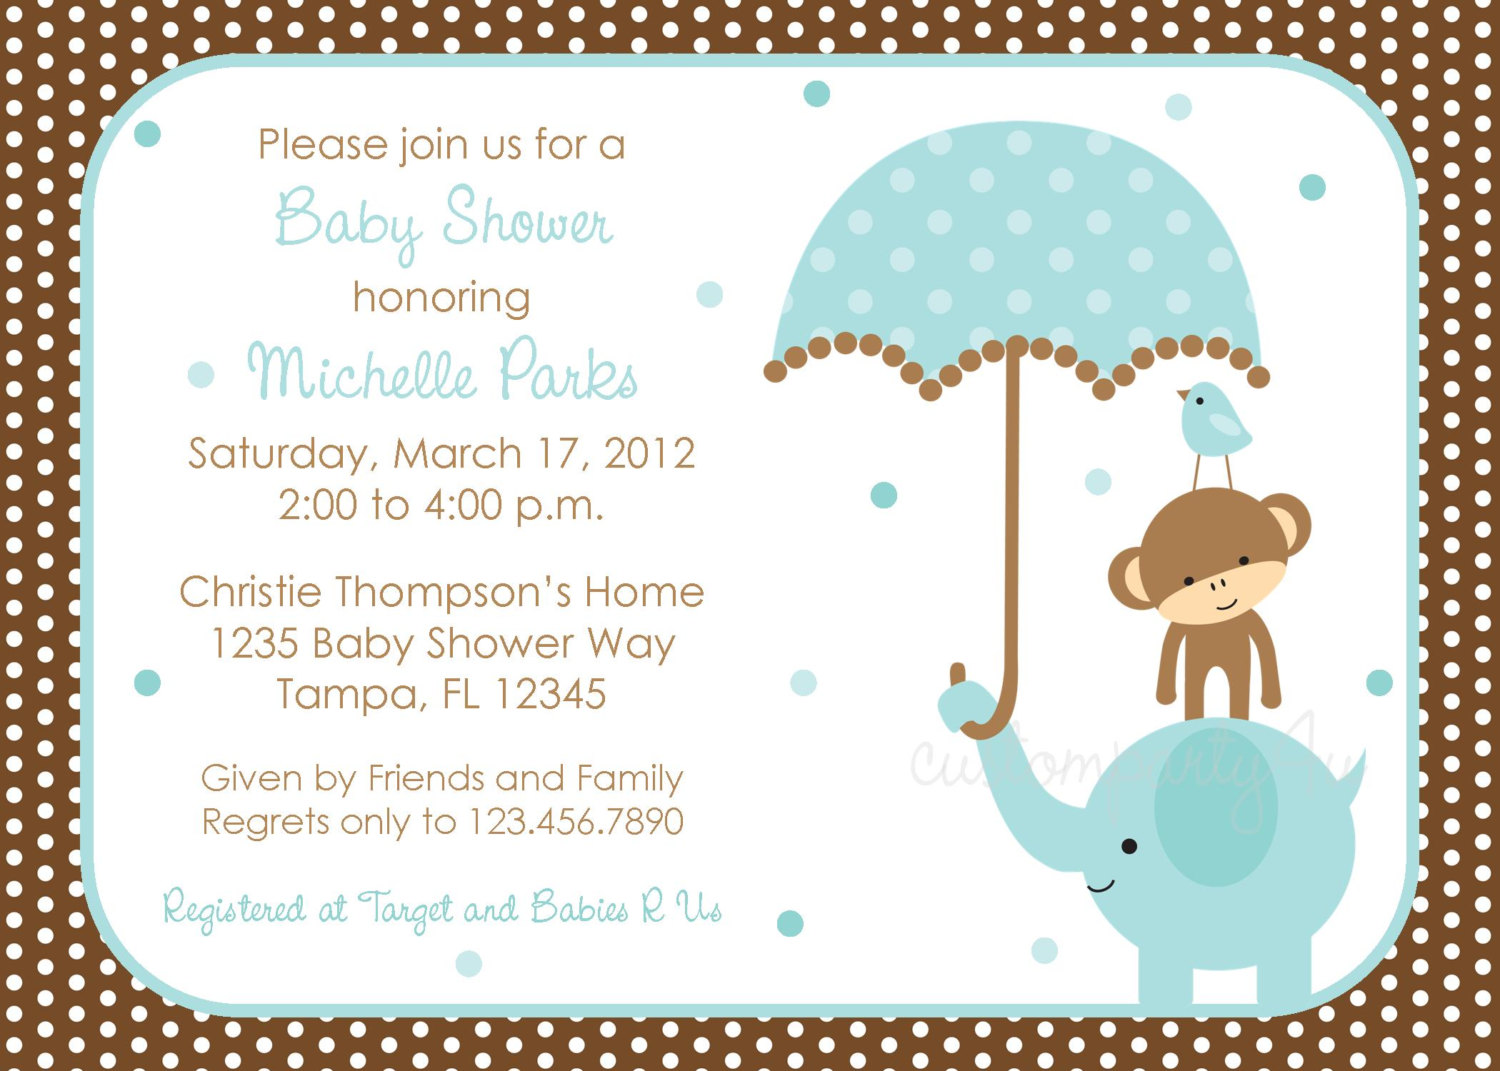 Full Size of Baby Shower:inspirational Elephant Baby Shower Invitations Photo Concepts Colors Free Baby Shower Invitations At Hobby Lobby With Hd Speach Free Baby Shower Invitations At Hobby Lobby With Hd Speach Awesome Card White Announcement